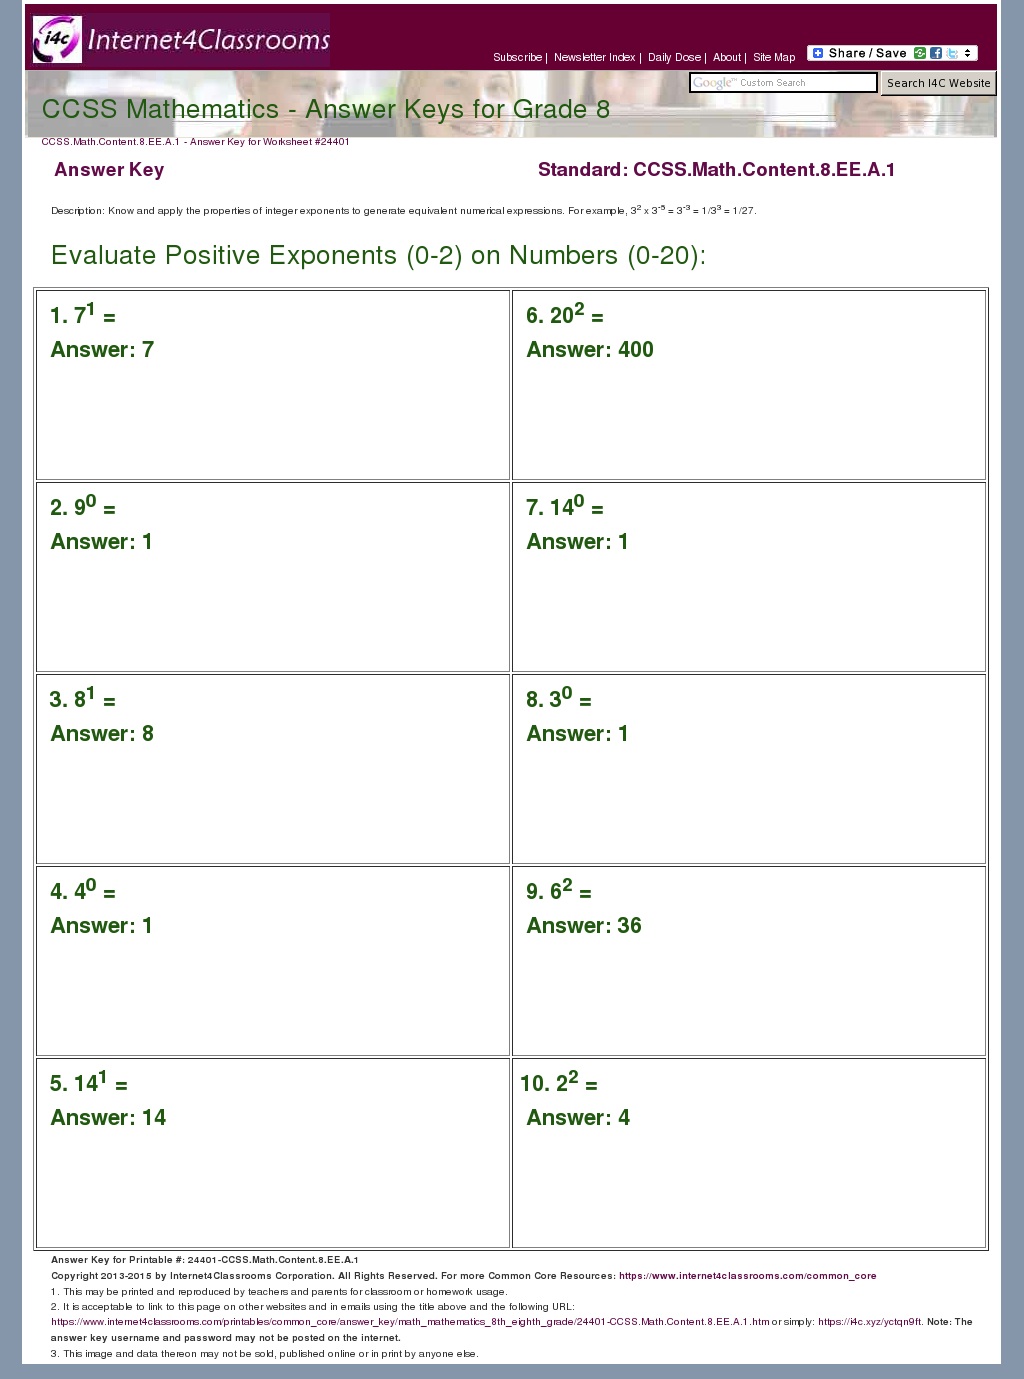 Answer Key Download - Worksheet #24401. CCSS.Math.Content.8.EE.A.1